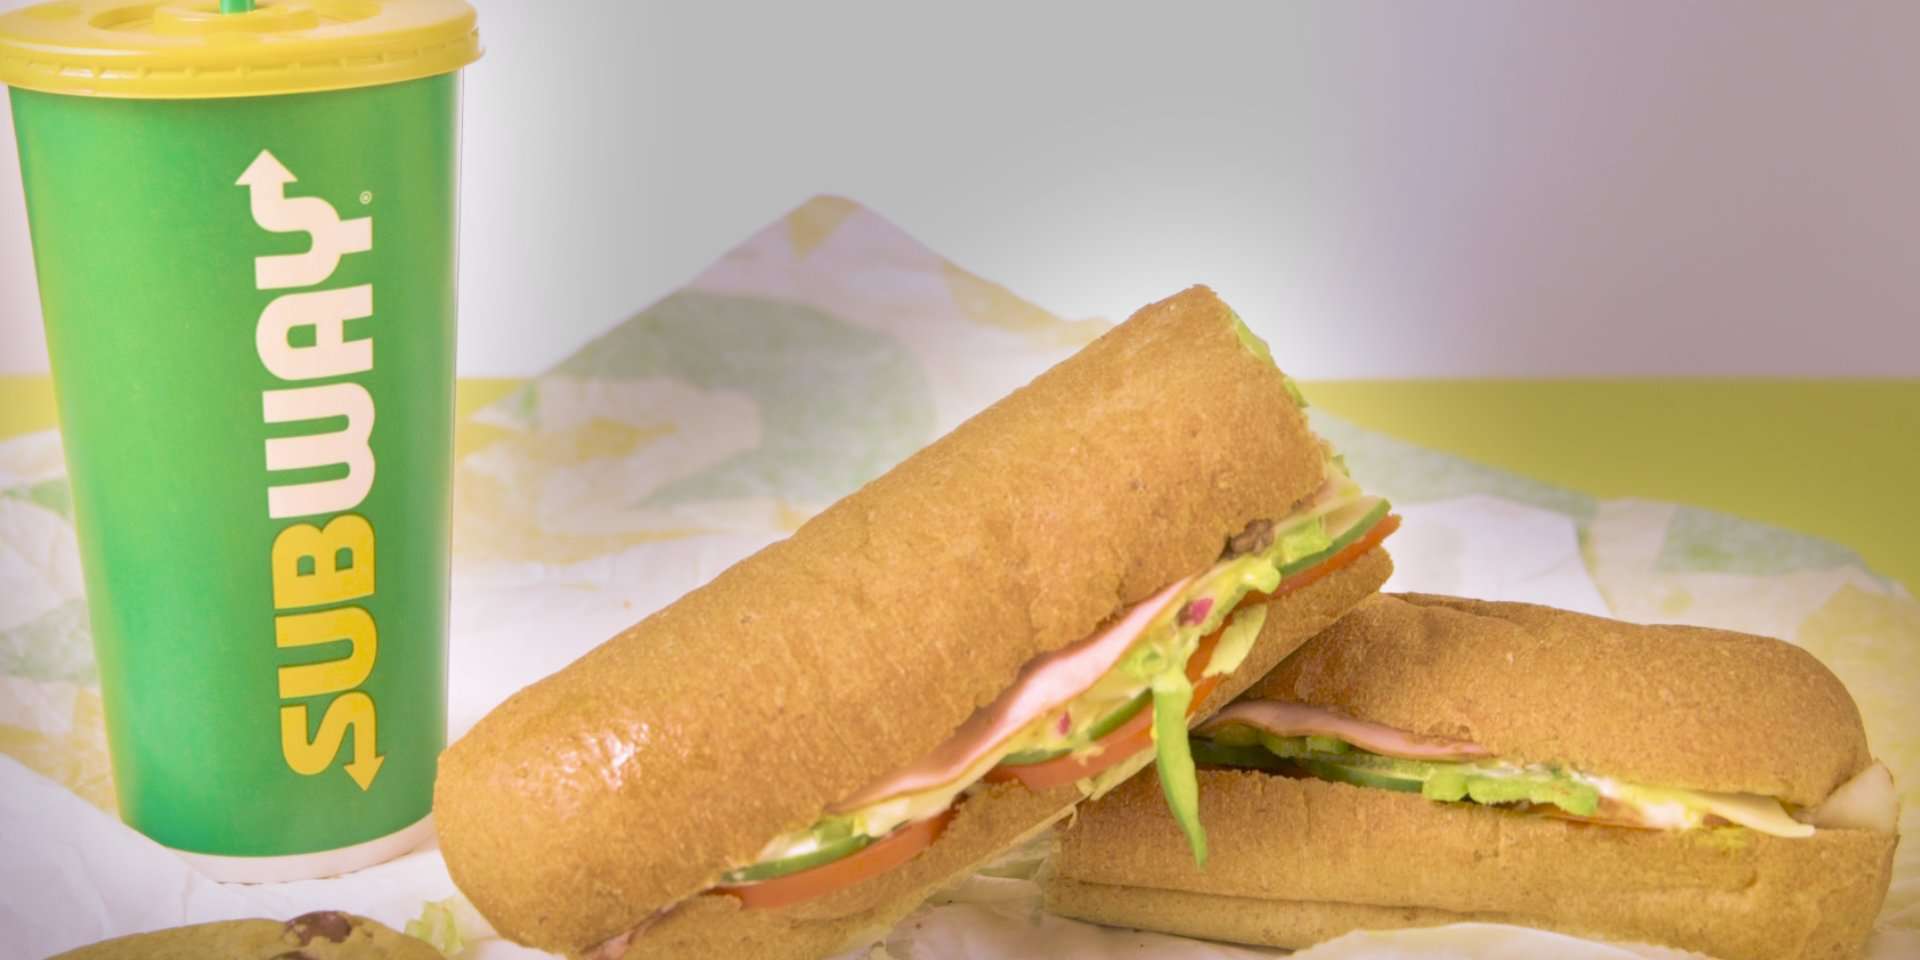 Taboola Ad Example 55922 - Subway's 42,000 Locations Are The Most Of Any Fast-food Chain On The Planet, But Franchise Owners Are Taking A Hit